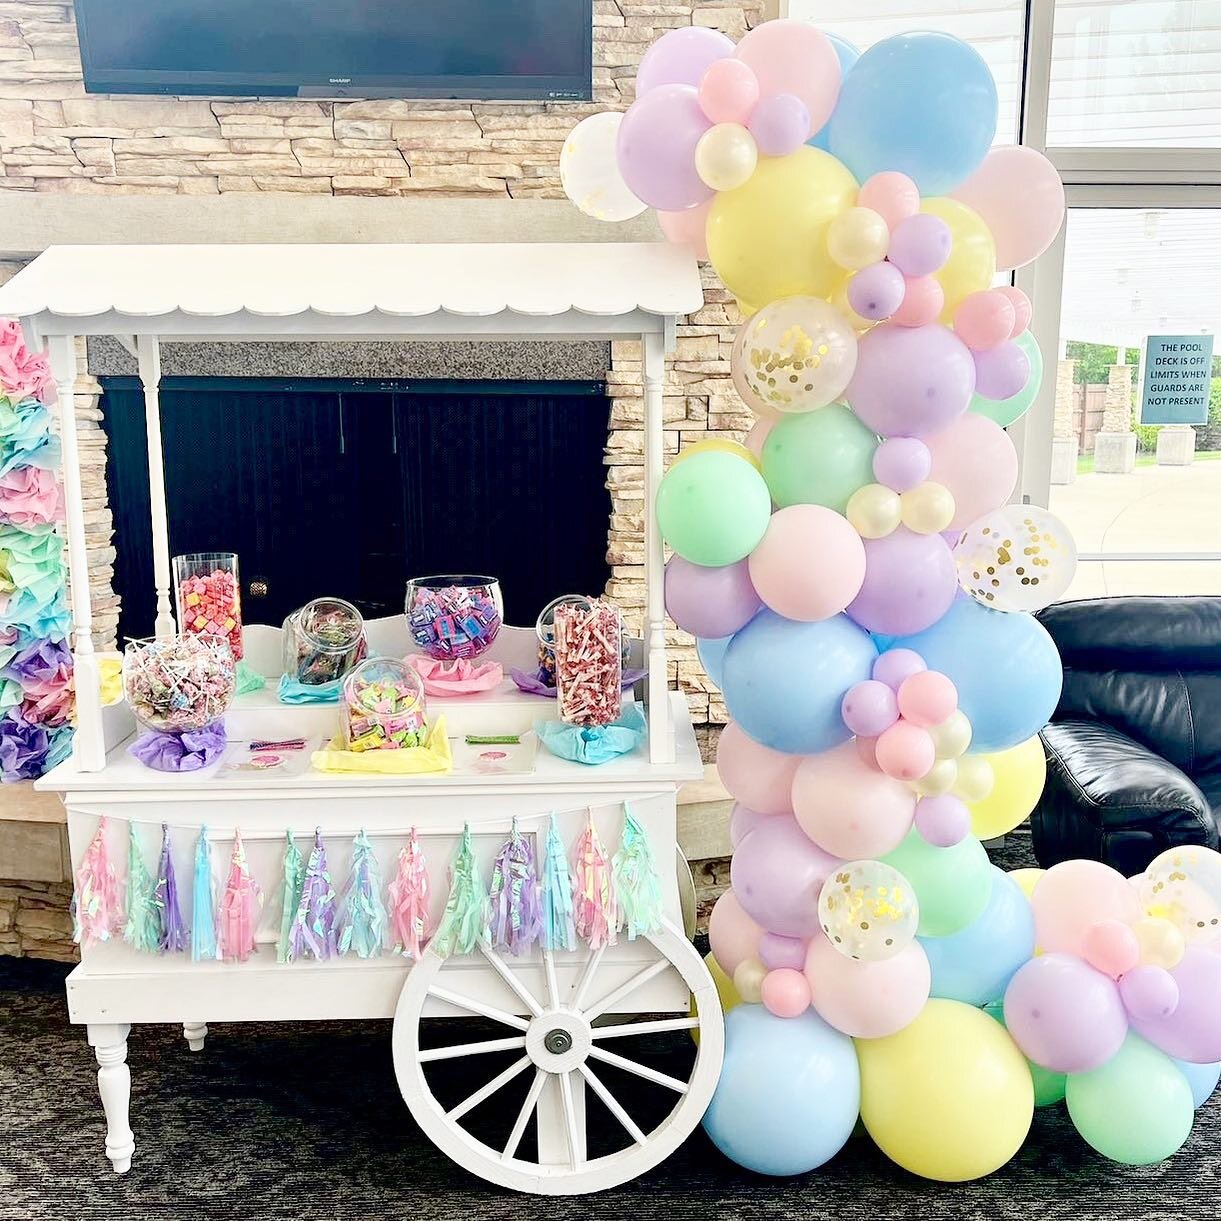 One of our Stand Up Demi Arches in the wild 💕 How sweet is it as an addition to this sweet cart?!? Our SUDA are always available and you can even order via our website www.tweepartees.com